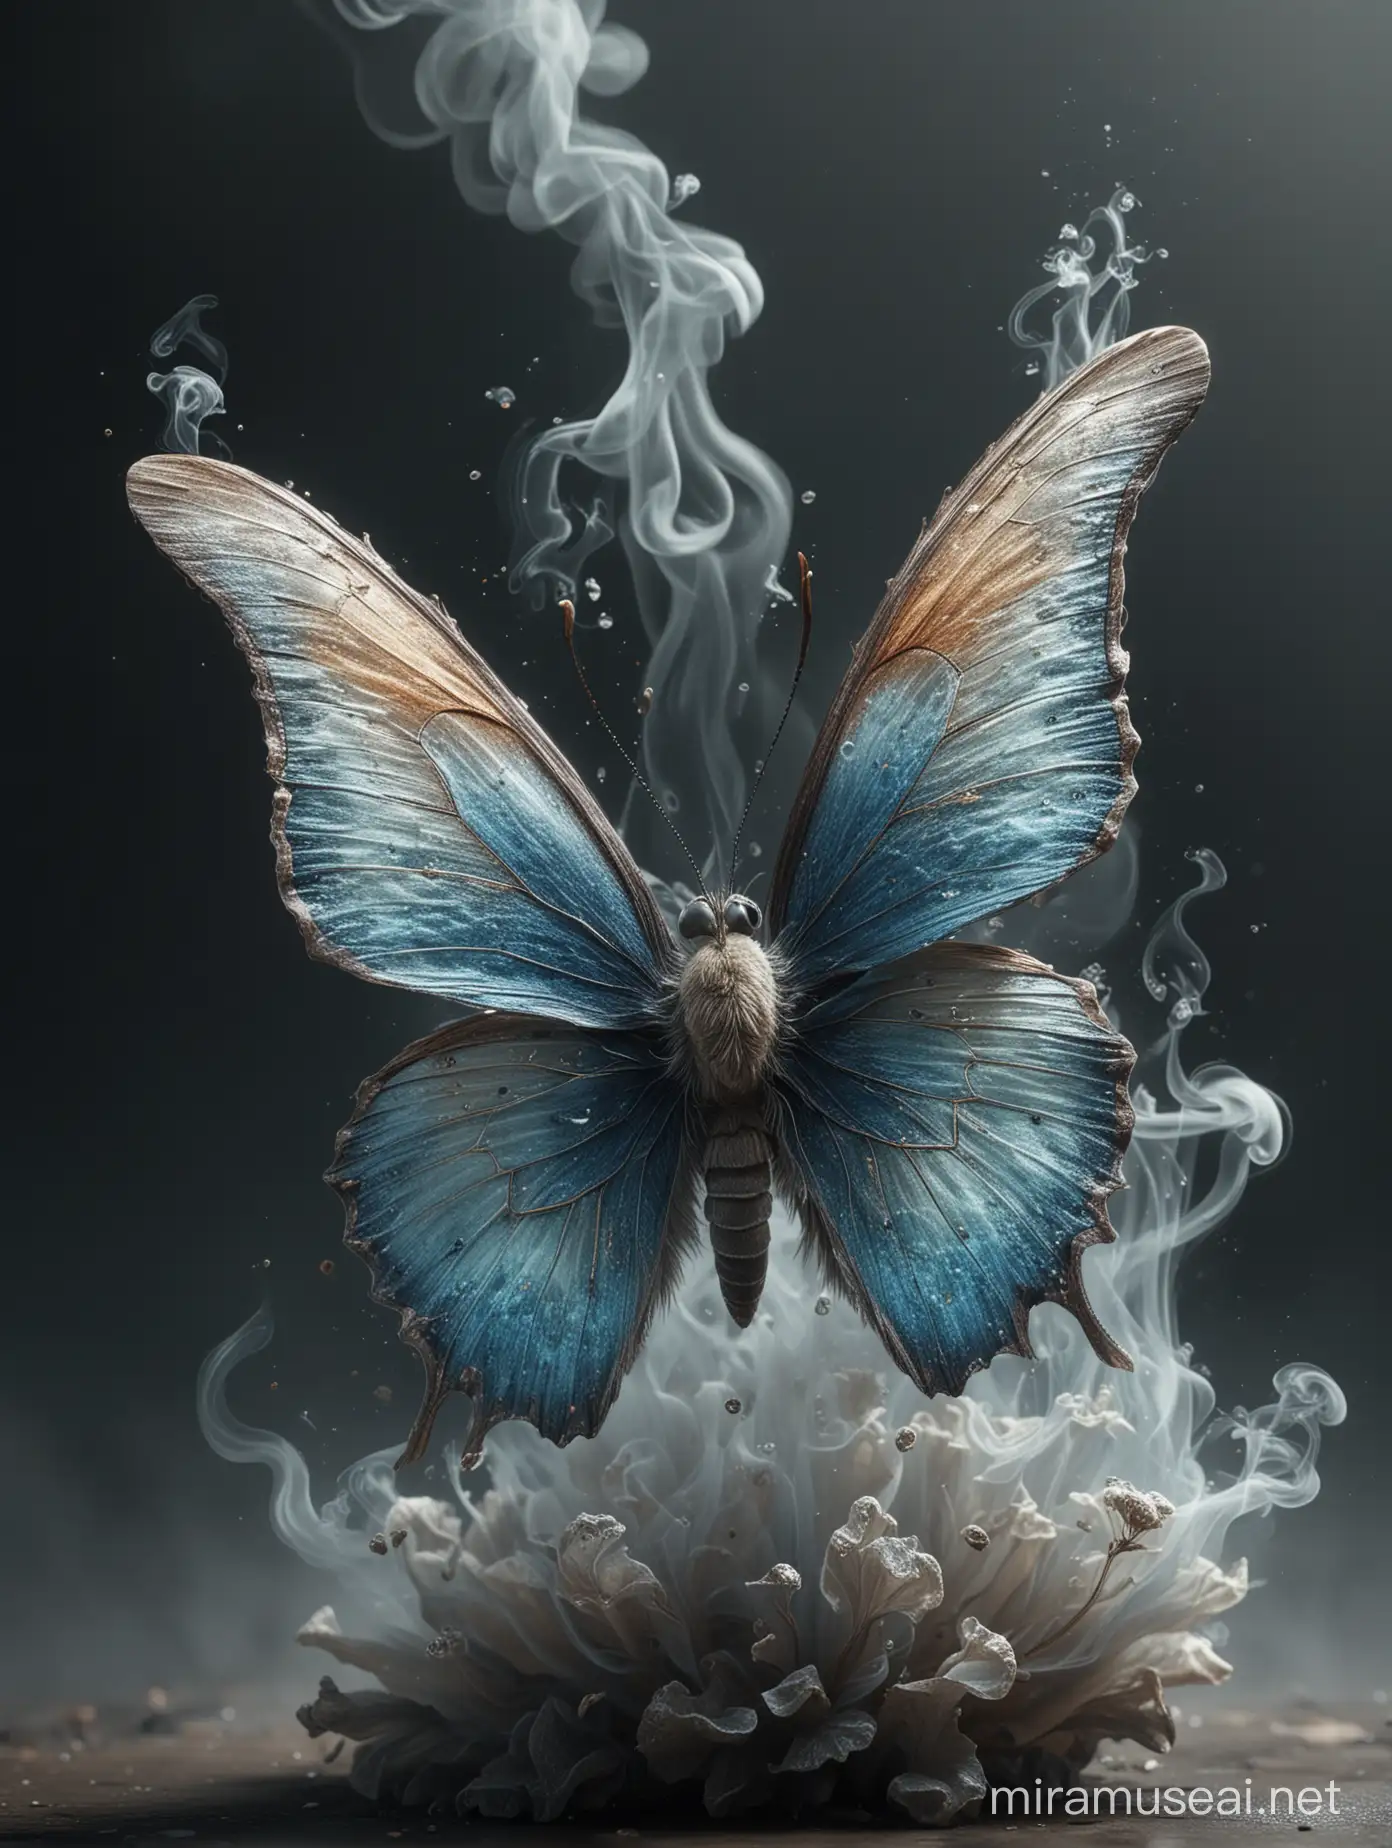 HyperRealistic Analog Butterfly Elf Amidst Smoky Atmosphere with Unique Textures